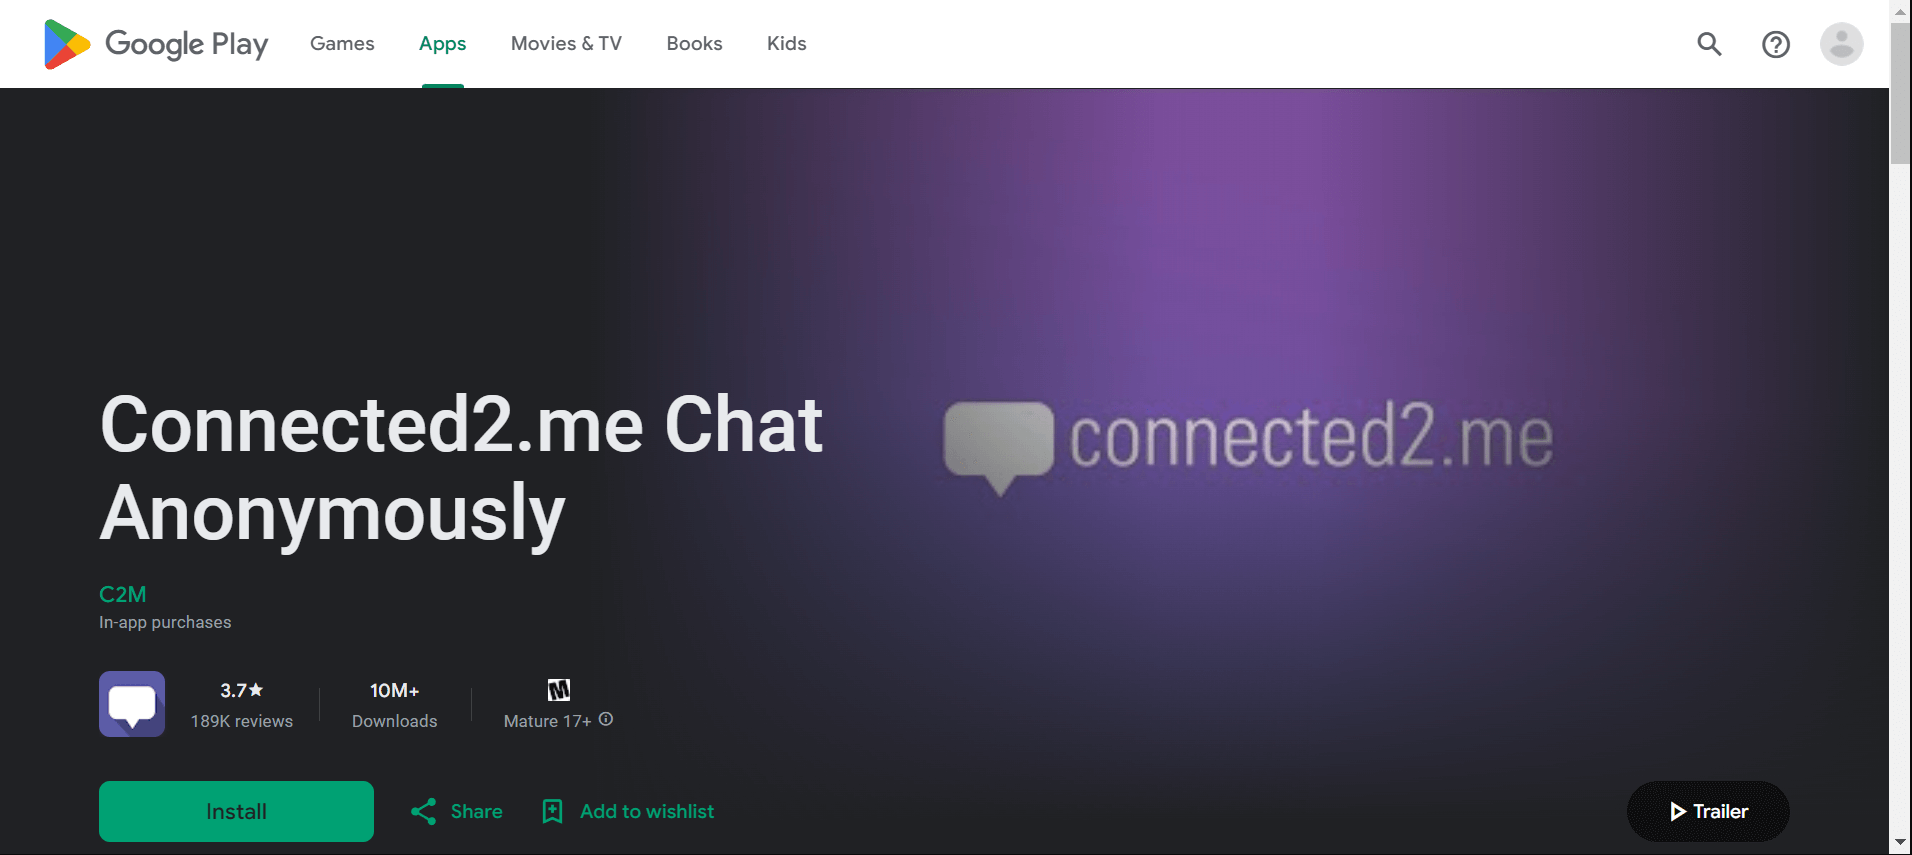 Connected2.me Anonymous Chat Rooms